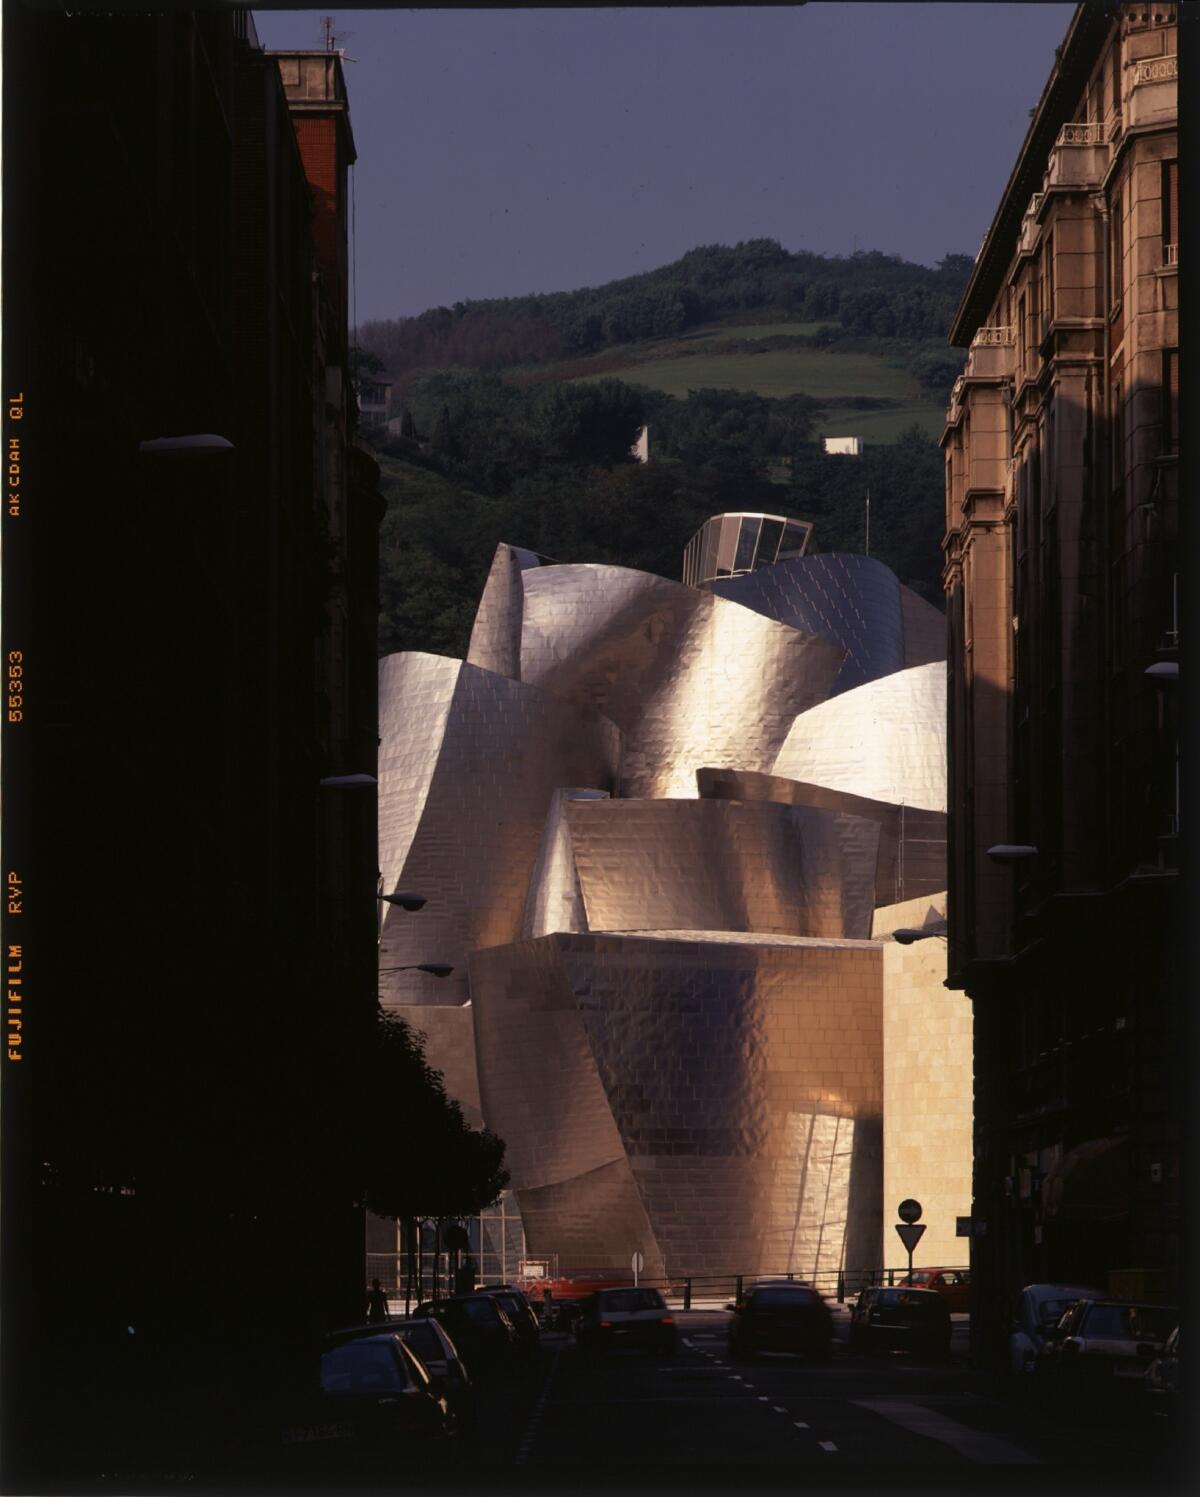 The Guggenheim Bilboa, as seen from Iparraguirre Street.